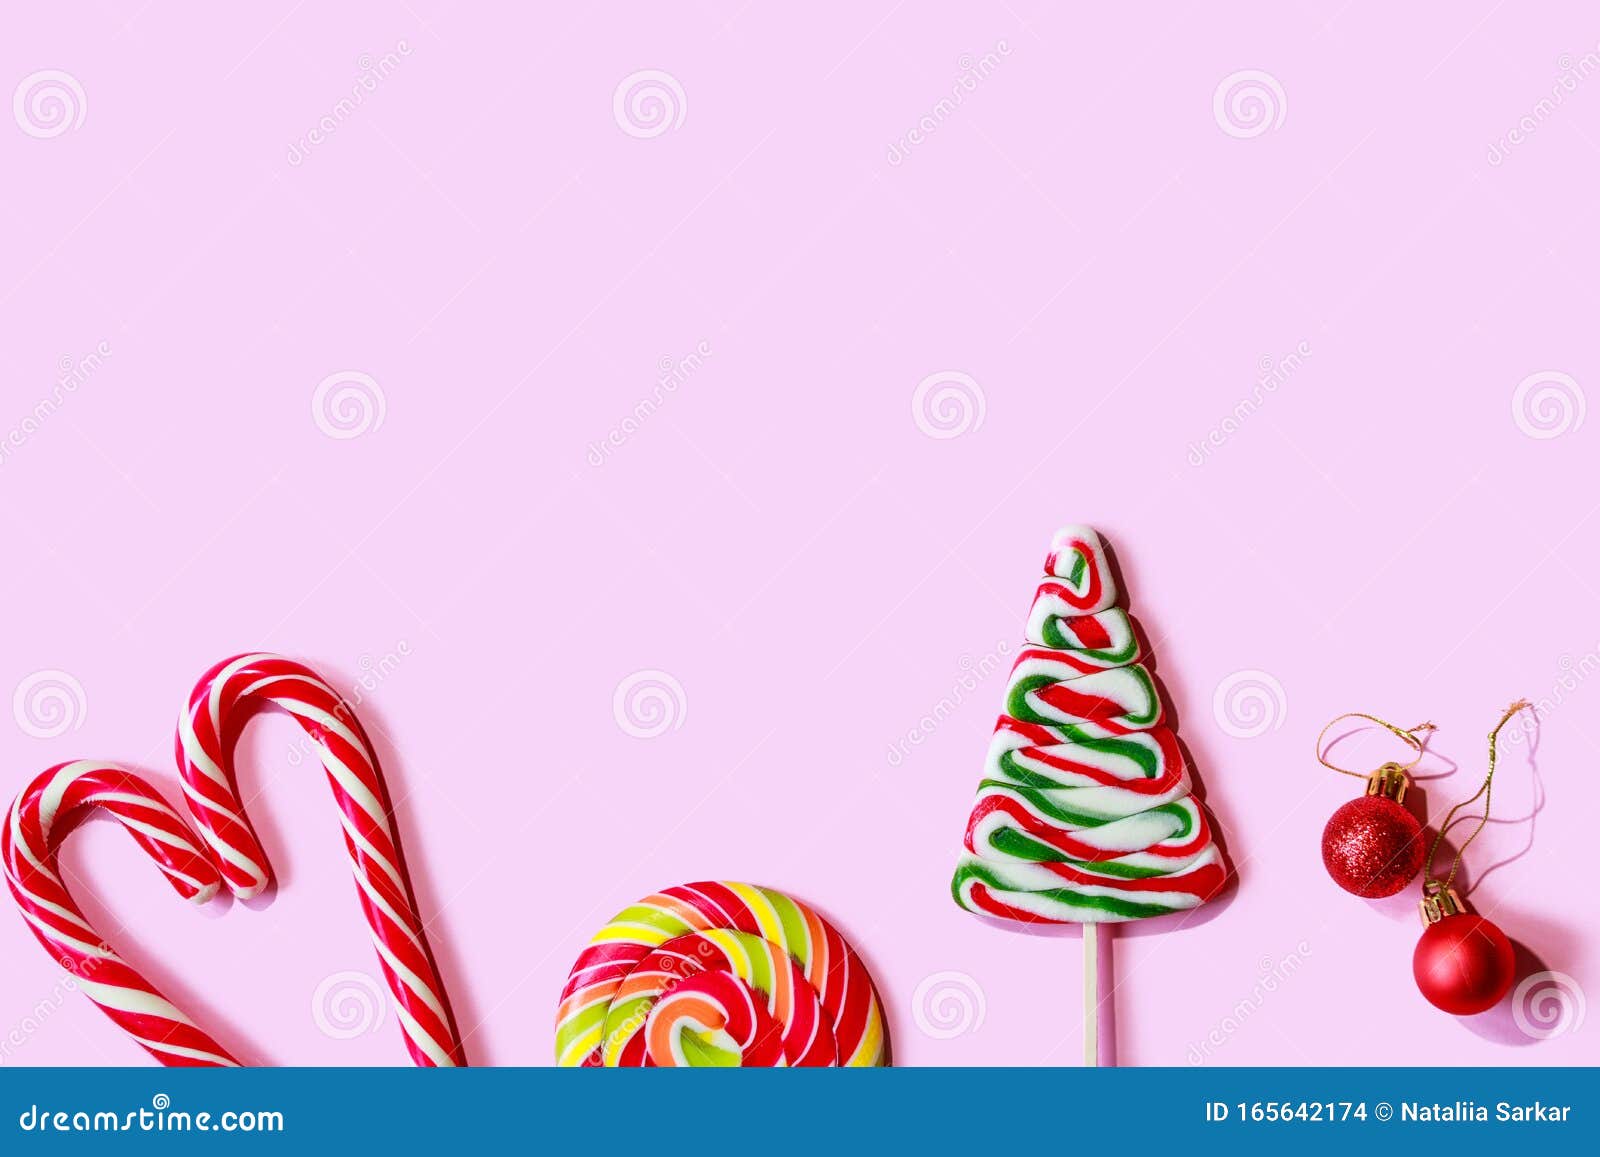 Christmas Candies and Sweets on a Pink Background. Stock Photo - Image ...